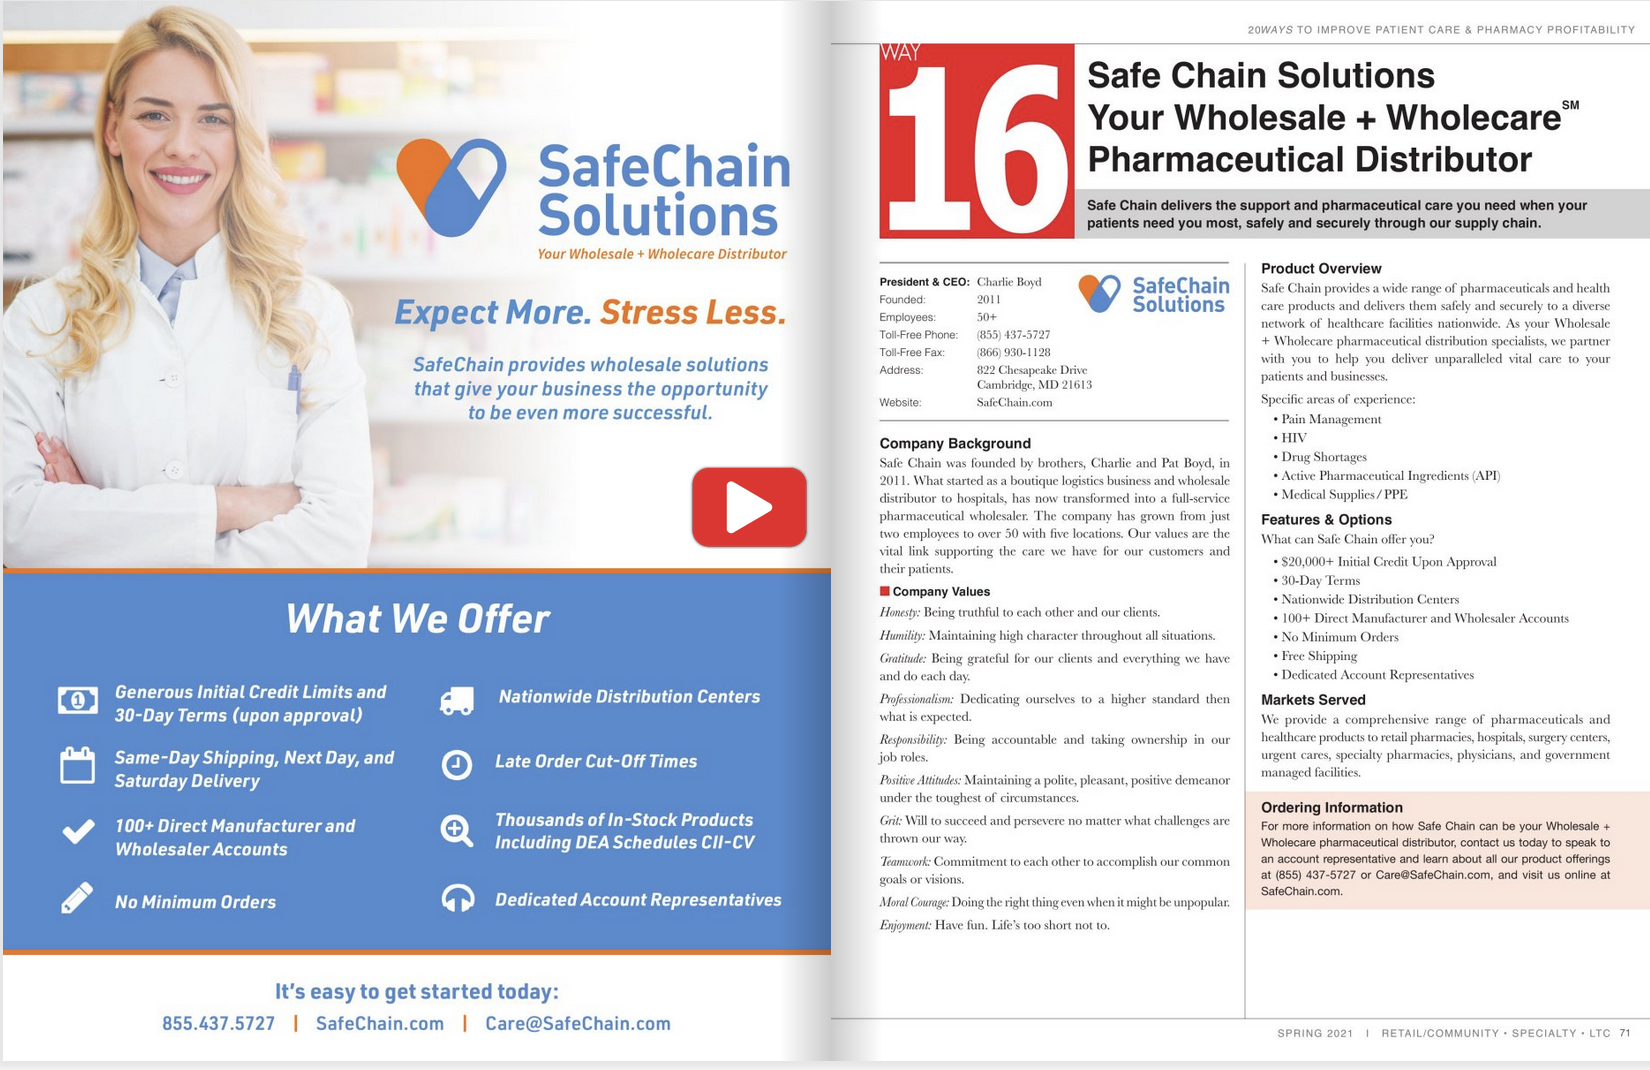 SafeChain Solutions Featured in RXinsider’s 20Ways Spring 2021 Issue